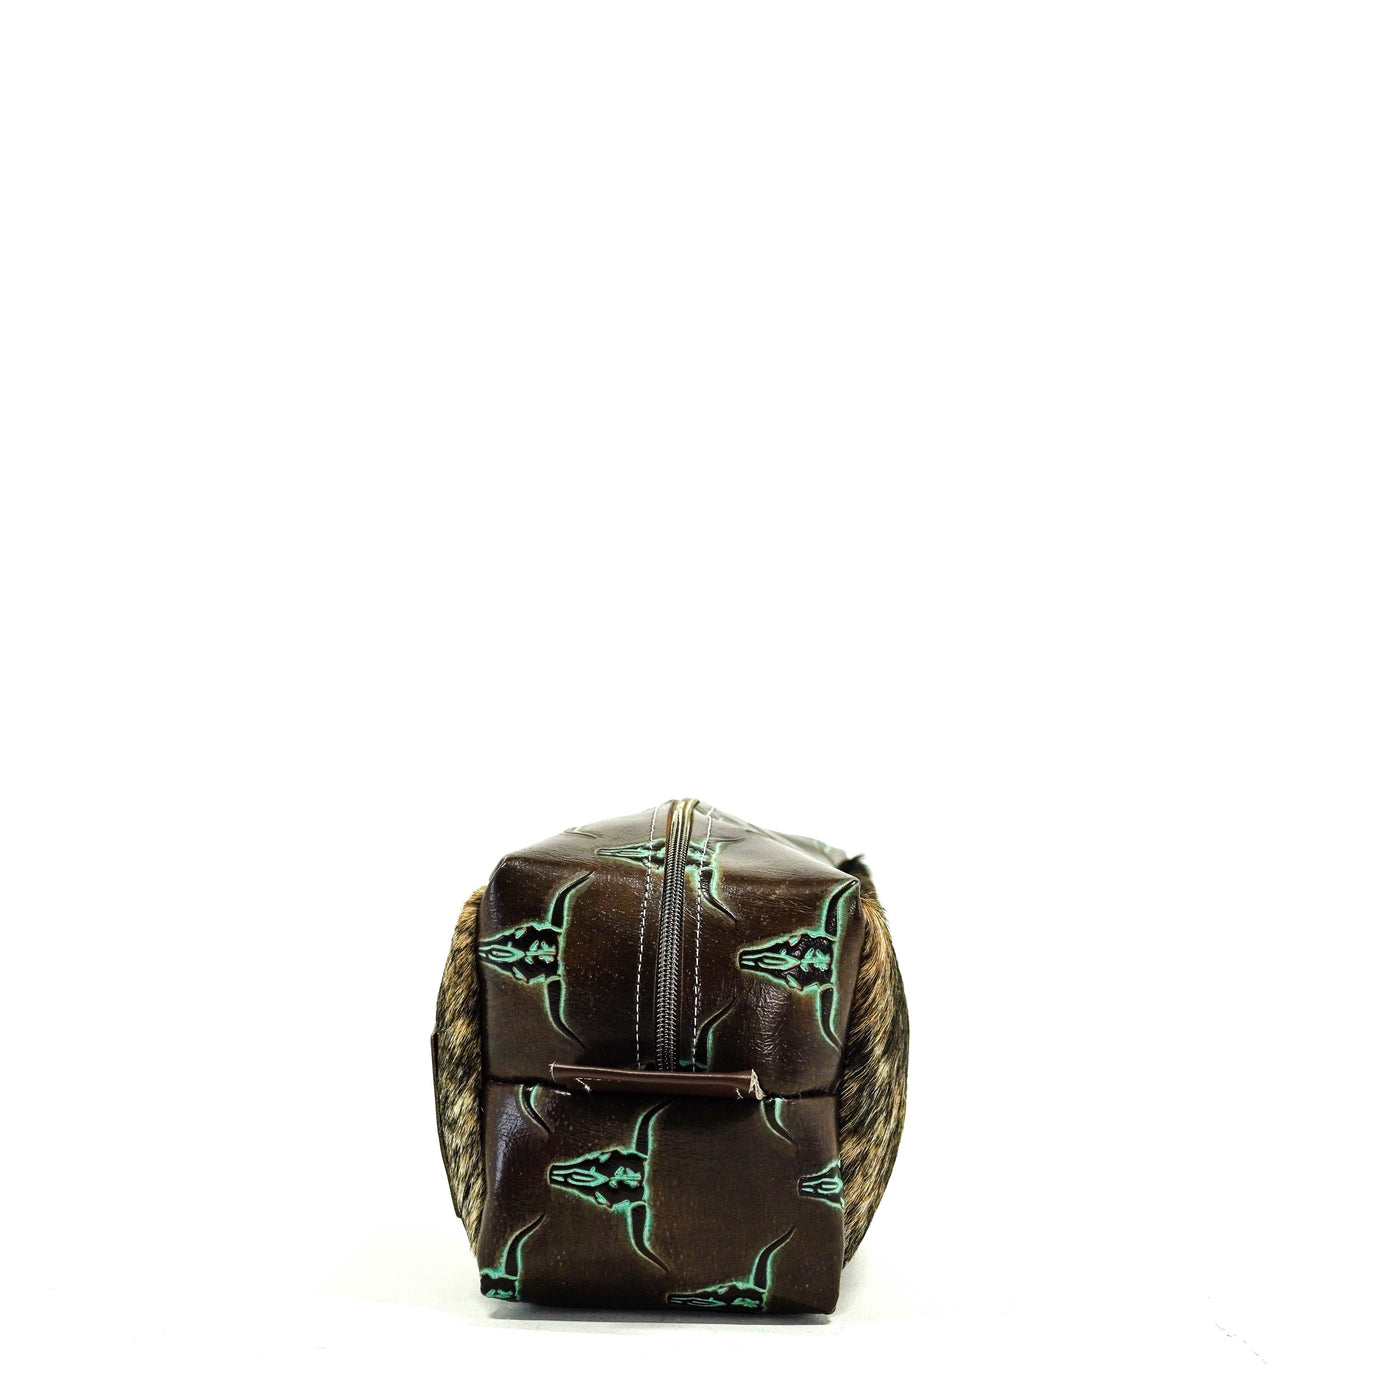 Dutton - Two-Tone Brindle w/ Mint Chocolate Skulls-Dutton-Western-Cowhide-Bags-Handmade-Products-Gifts-Dancing Cactus Designs